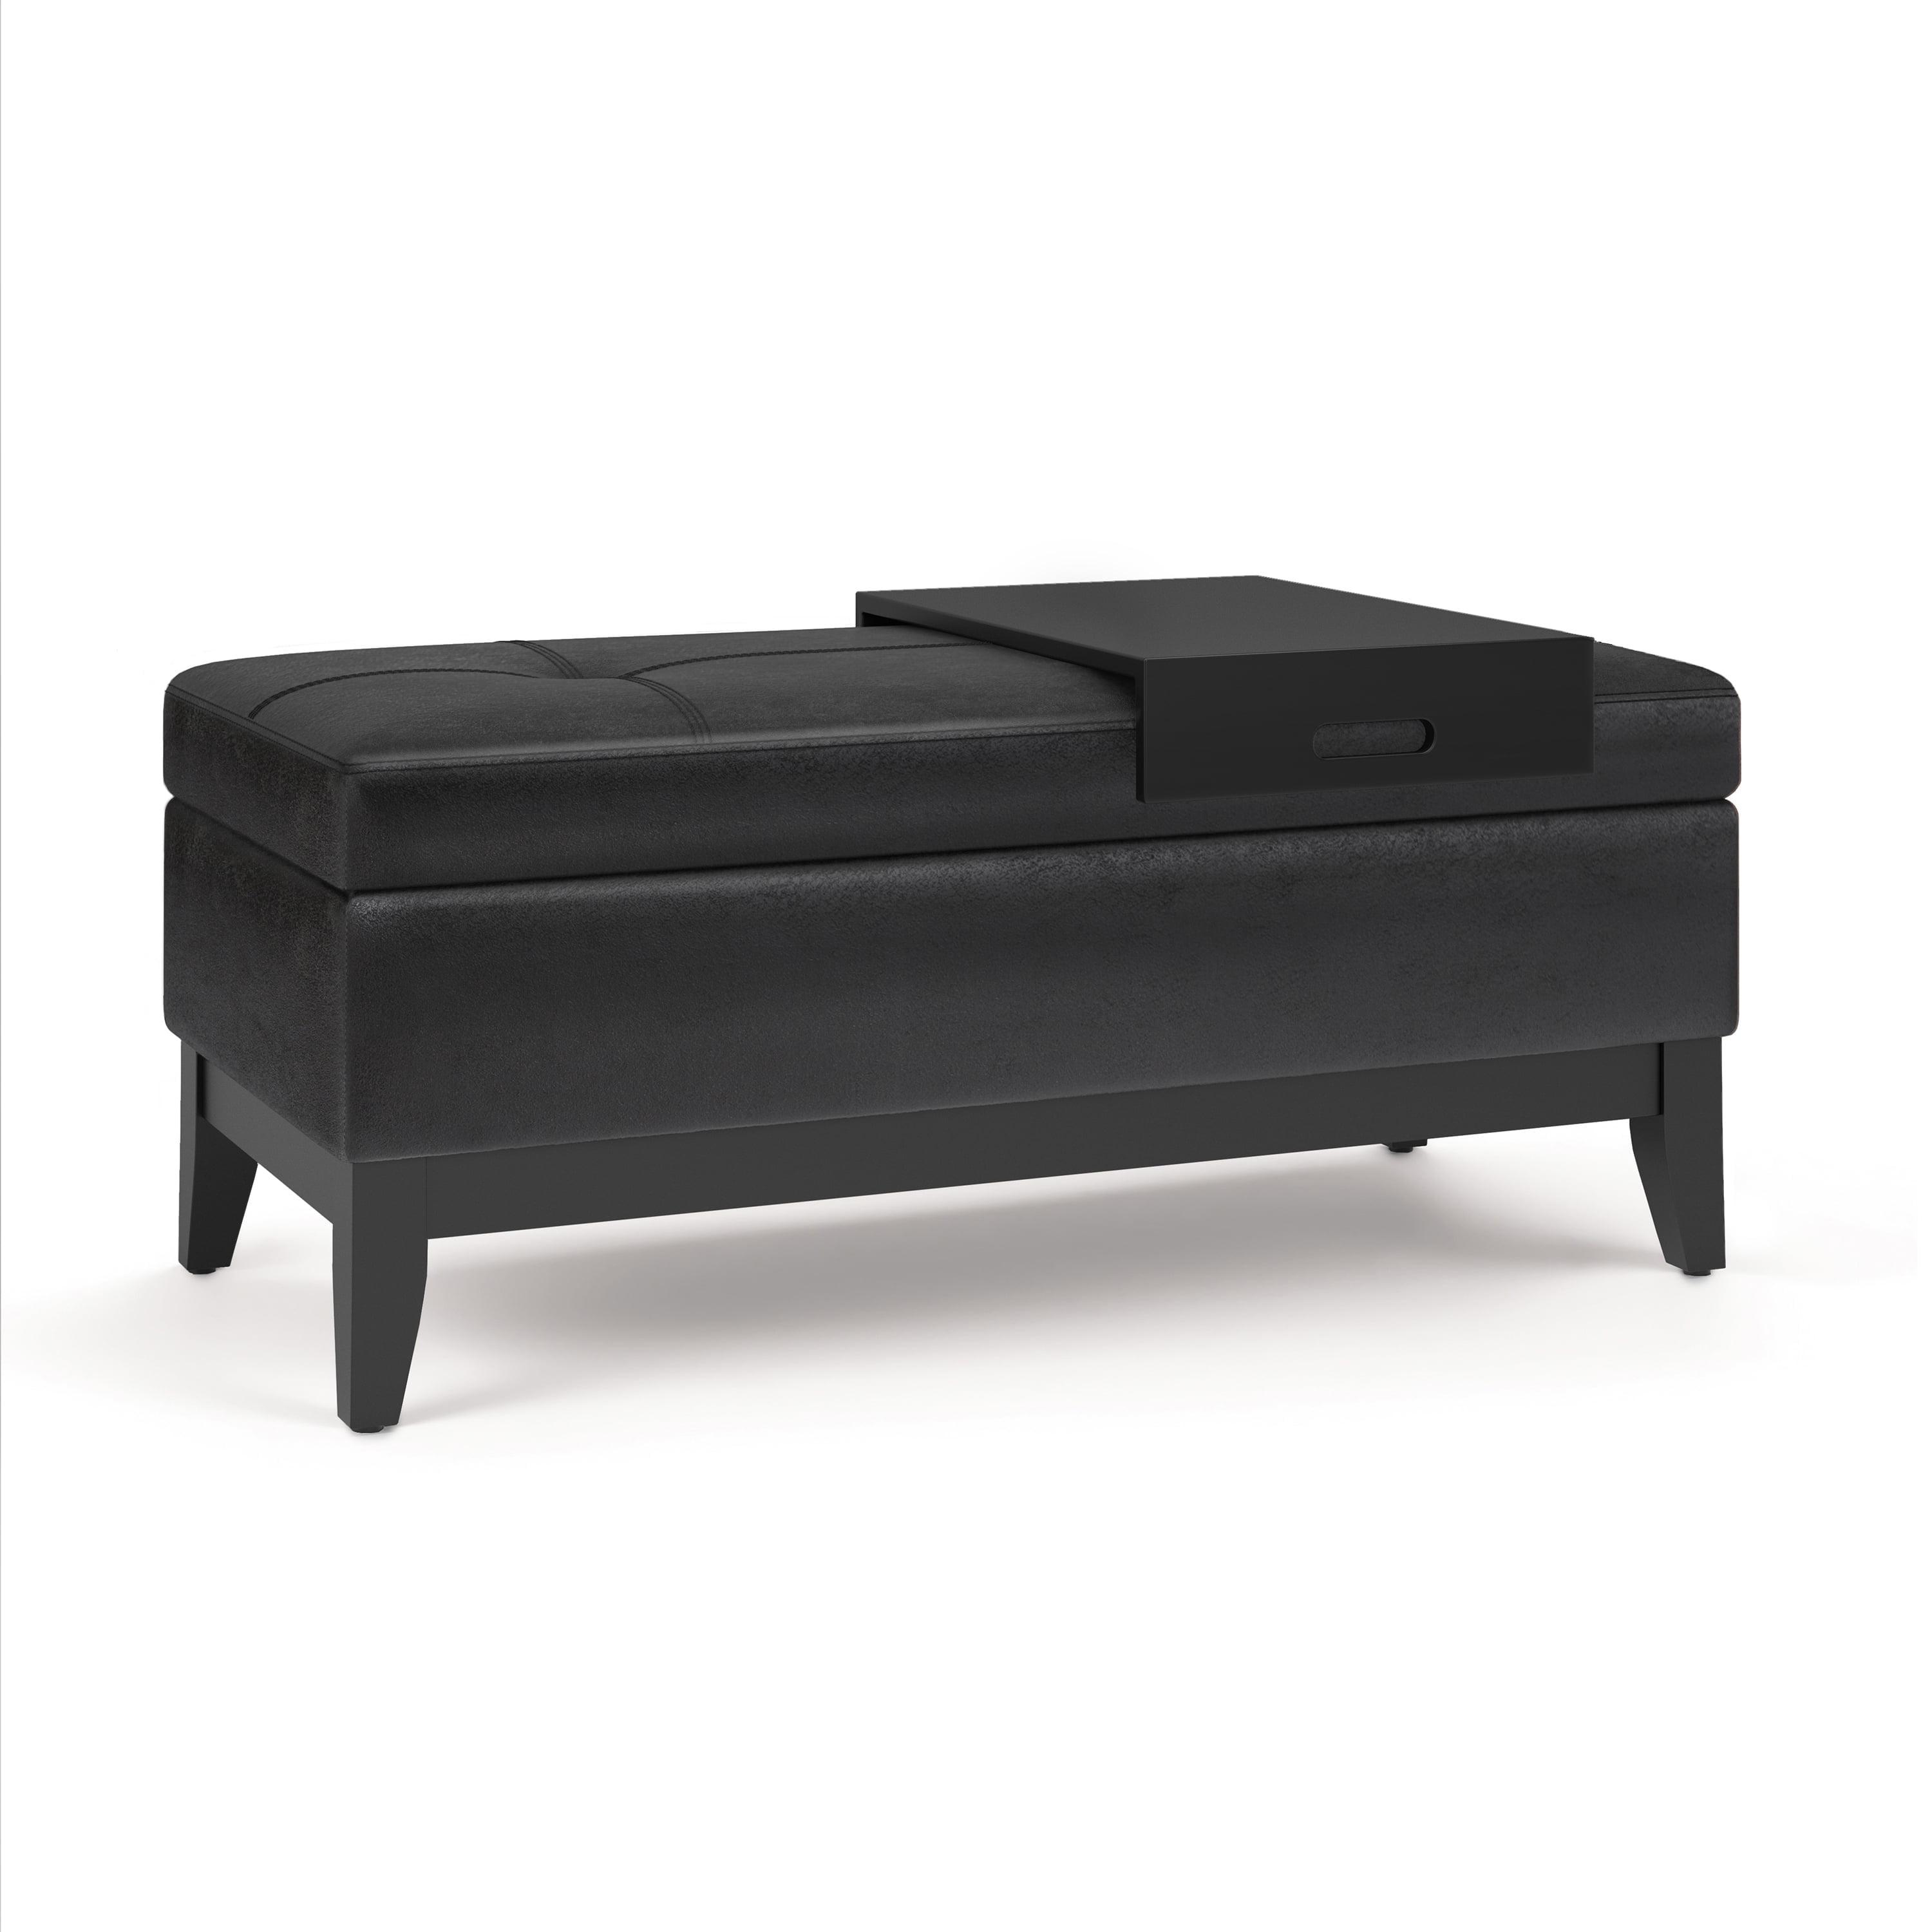 Distressed Black Tufted Footstool Ottoman with Sturdy Tray